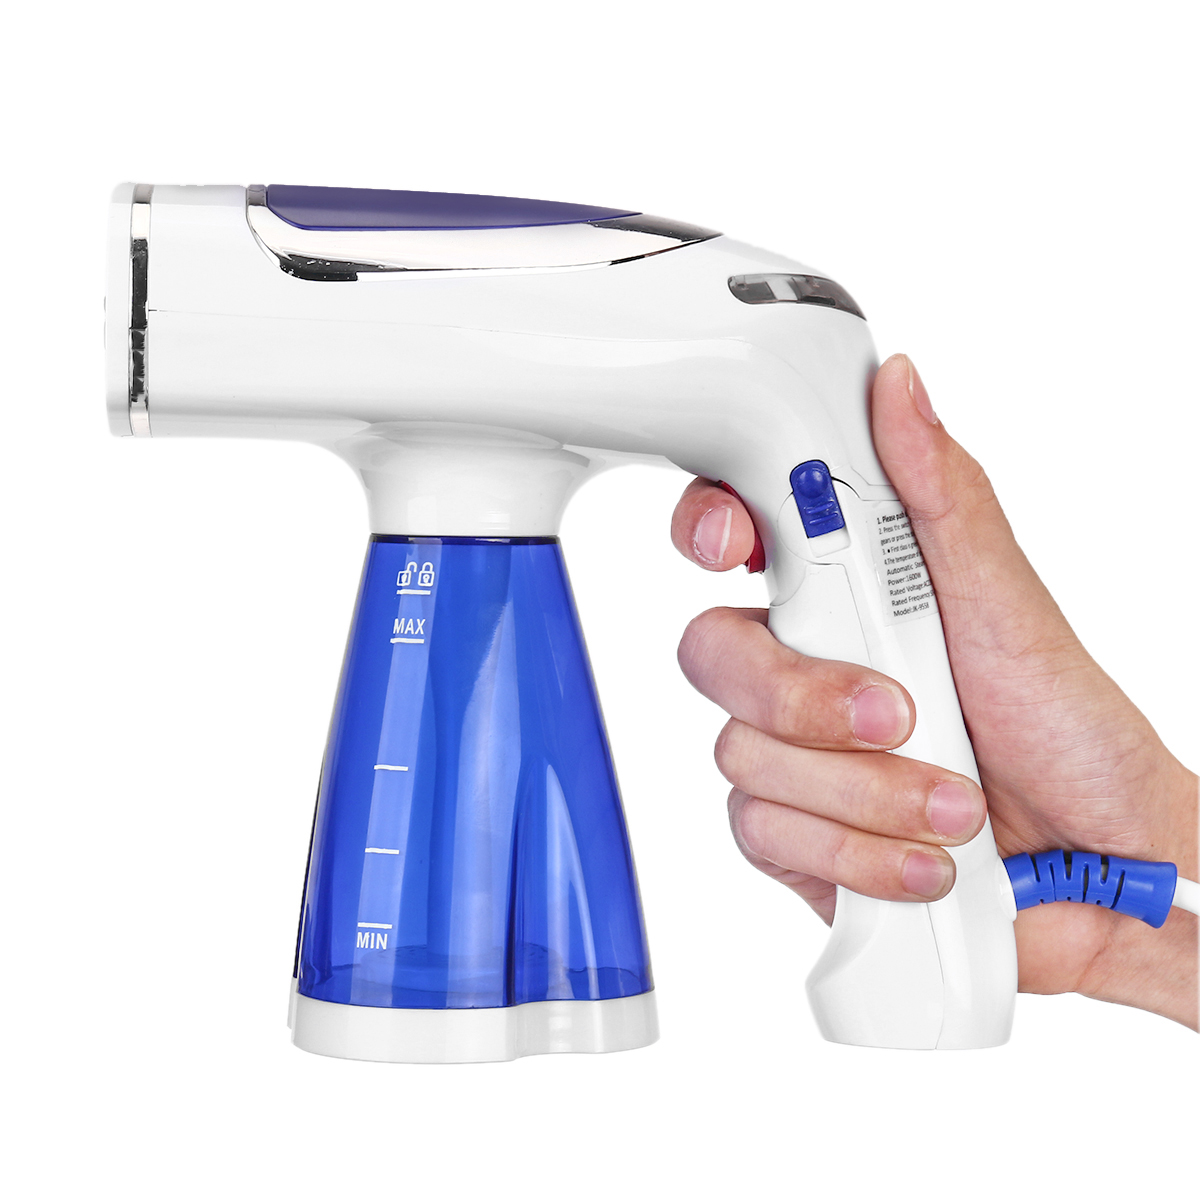 1600W 200ml Folding Handheld Clothes Steamer Hanging Ironing Machine Portable Garment Steamer Brush for Clothes